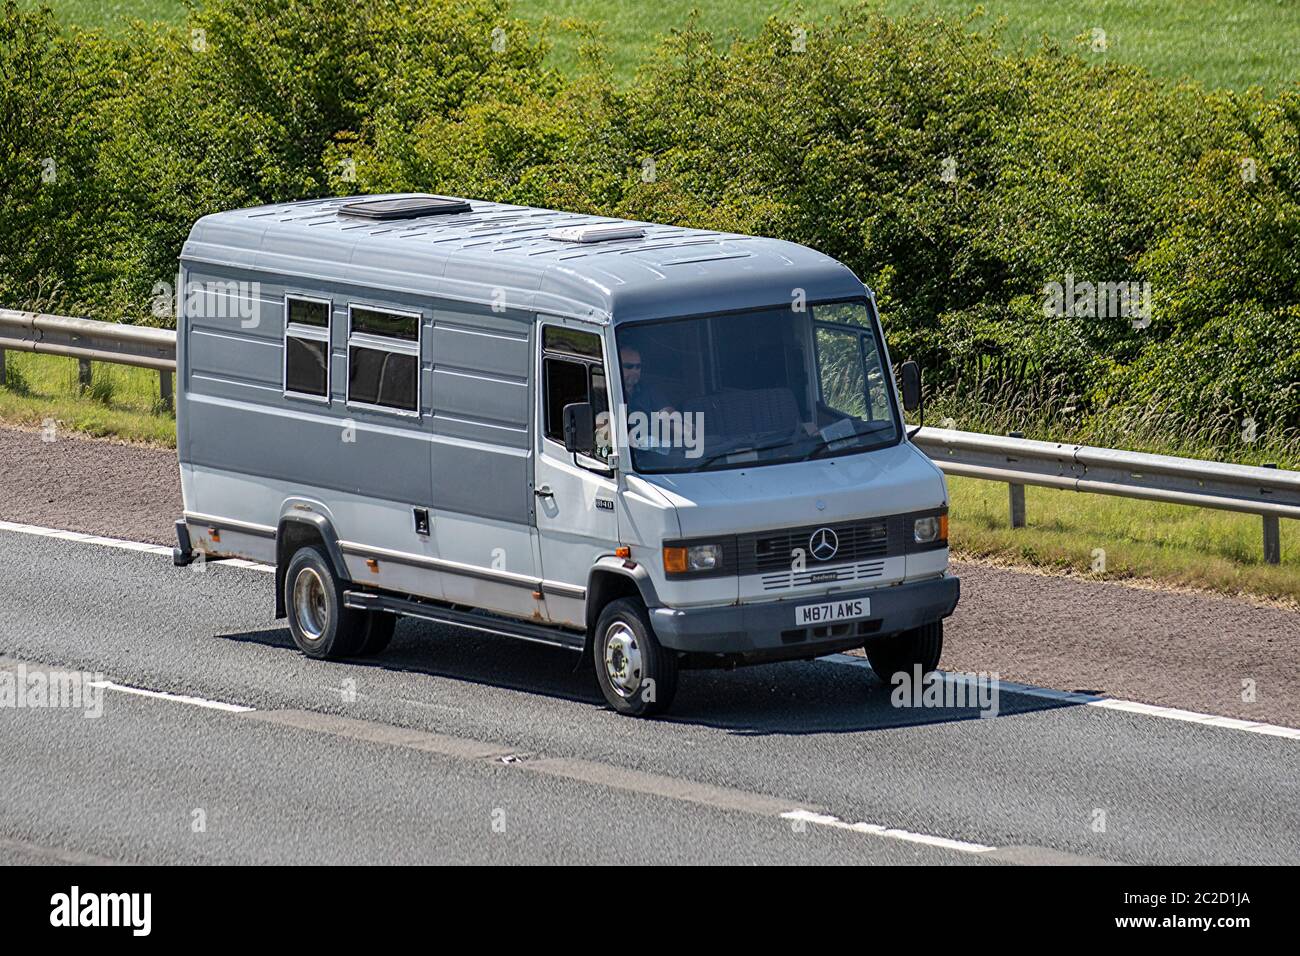 1994 Mercedes-Benz Bremer Transporter T1; Vehicular traffic moving  vehicles, cars driving vehicle on UK roads, motors, motoring on the M6  motorway. Touring Caravans and Motorhomes, campervans, RV leisure vehicle,  family holidays, caravanette